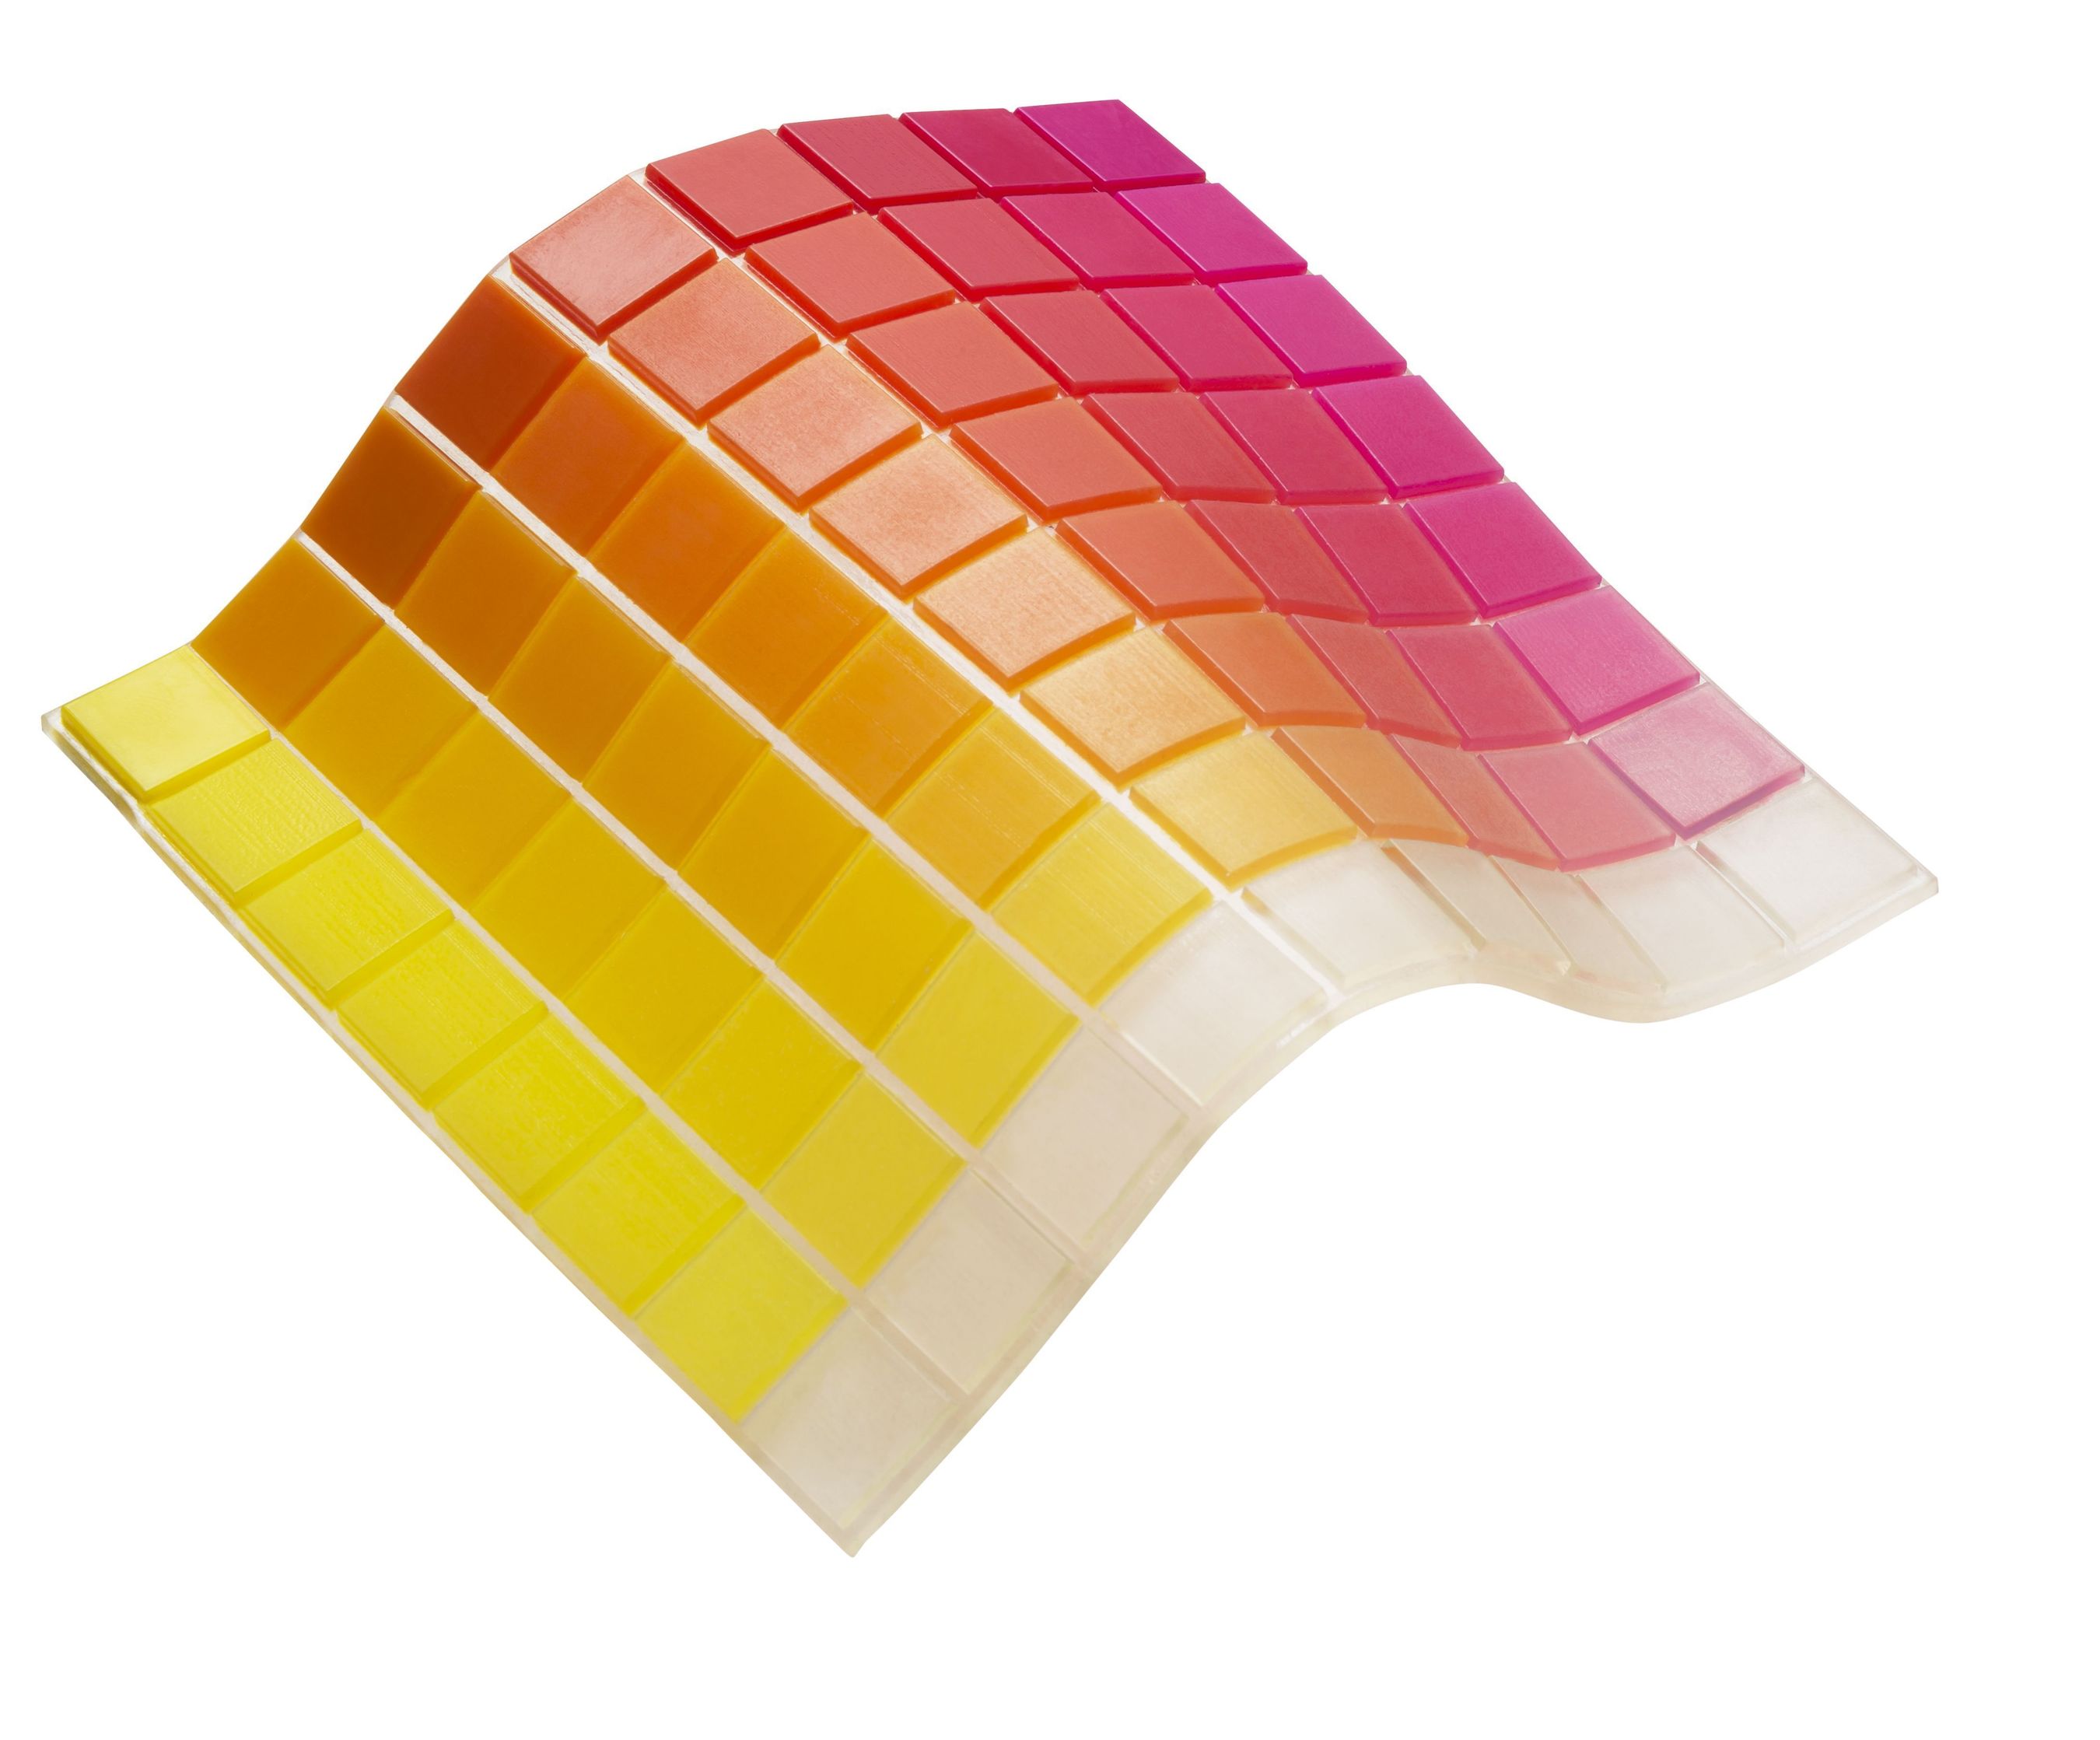 One of the six new rubber-like Tango color palettes, enabling diverse transparent to opaque colors with additional new Shore A Values, combining various degrees of flexibility & color translucency in one print job* (PRNewsFoto/Stratasys)